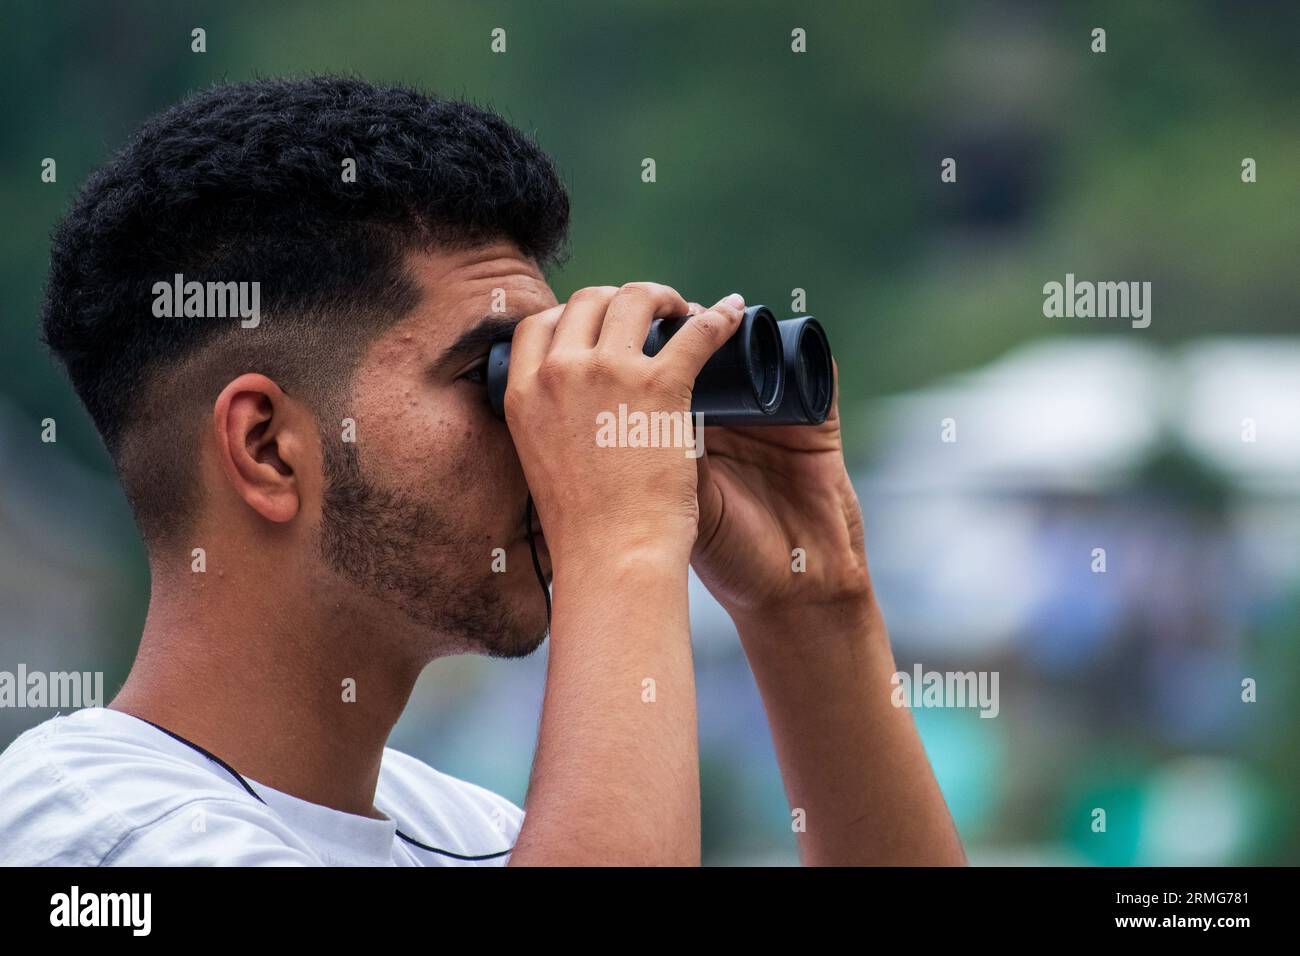 A local visitor in Indian administered Kashmir looks through binoculars towards Pakistan Administered Kashmir on the banks of Neelam river or Kishan Ganga that has divided Kashmir into two parts controlled by nuclear rivals India and Pakistan. The river acts as a disputed line of control and flows through a village called Keran from both sides which is located on the northern side of Indian Kashmir's Border district Kupwara some 150kms from Srinagar and 93kms from Muzaffarabad, in the Pakistan side of Kashmir. (Photo by Faisal Bashir/SOPA Images/Sipa USA) Stock Photo